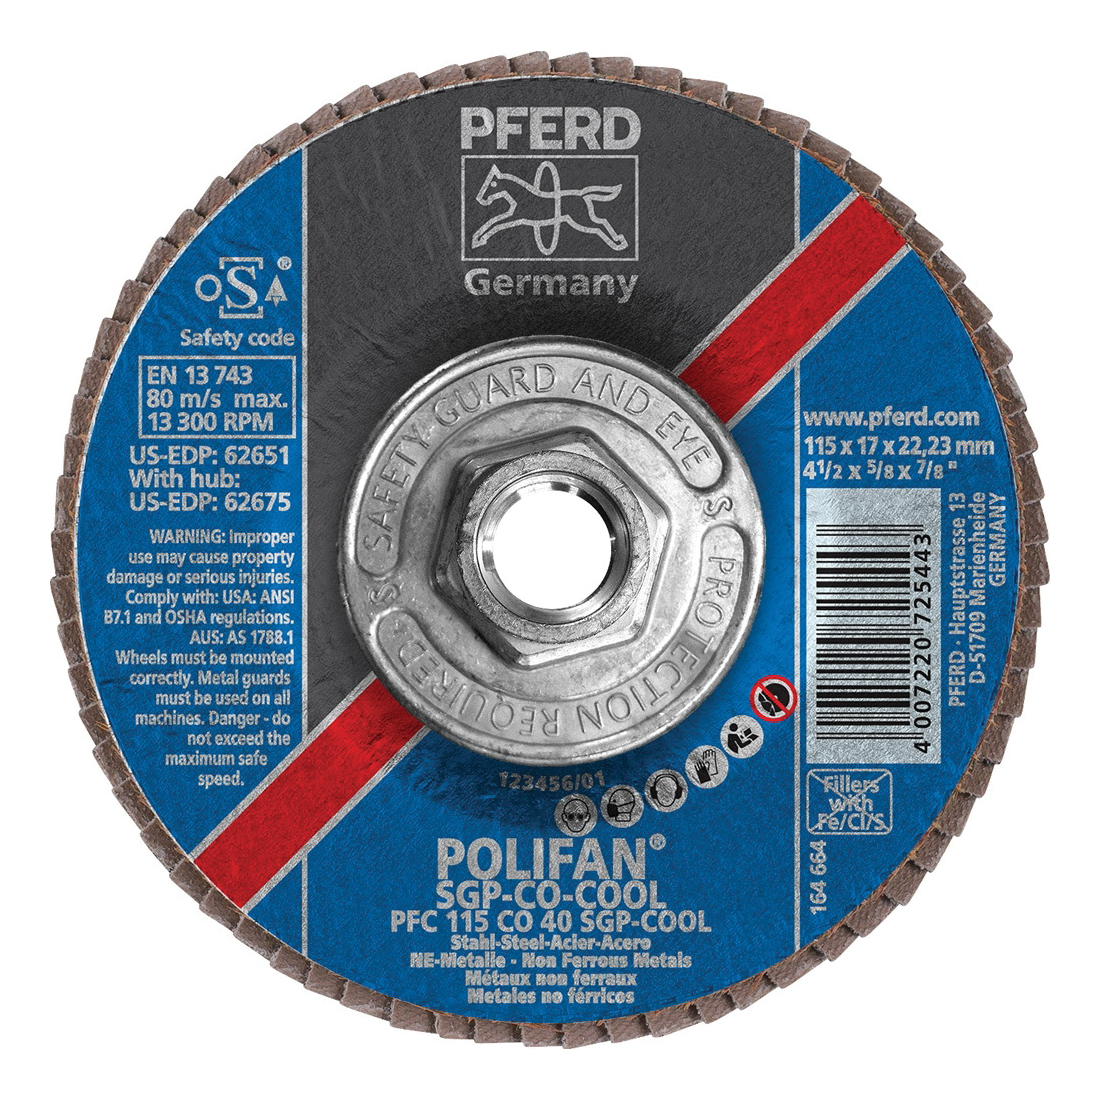 PFERD Polifan® 62675 Special Line SGP CO-COOL Threaded Coated Abrasive Flap Disc, 4-1/2 in Dia, 40 Grit, Ceramic Oxide Abrasive, Type 29 Conical Disc